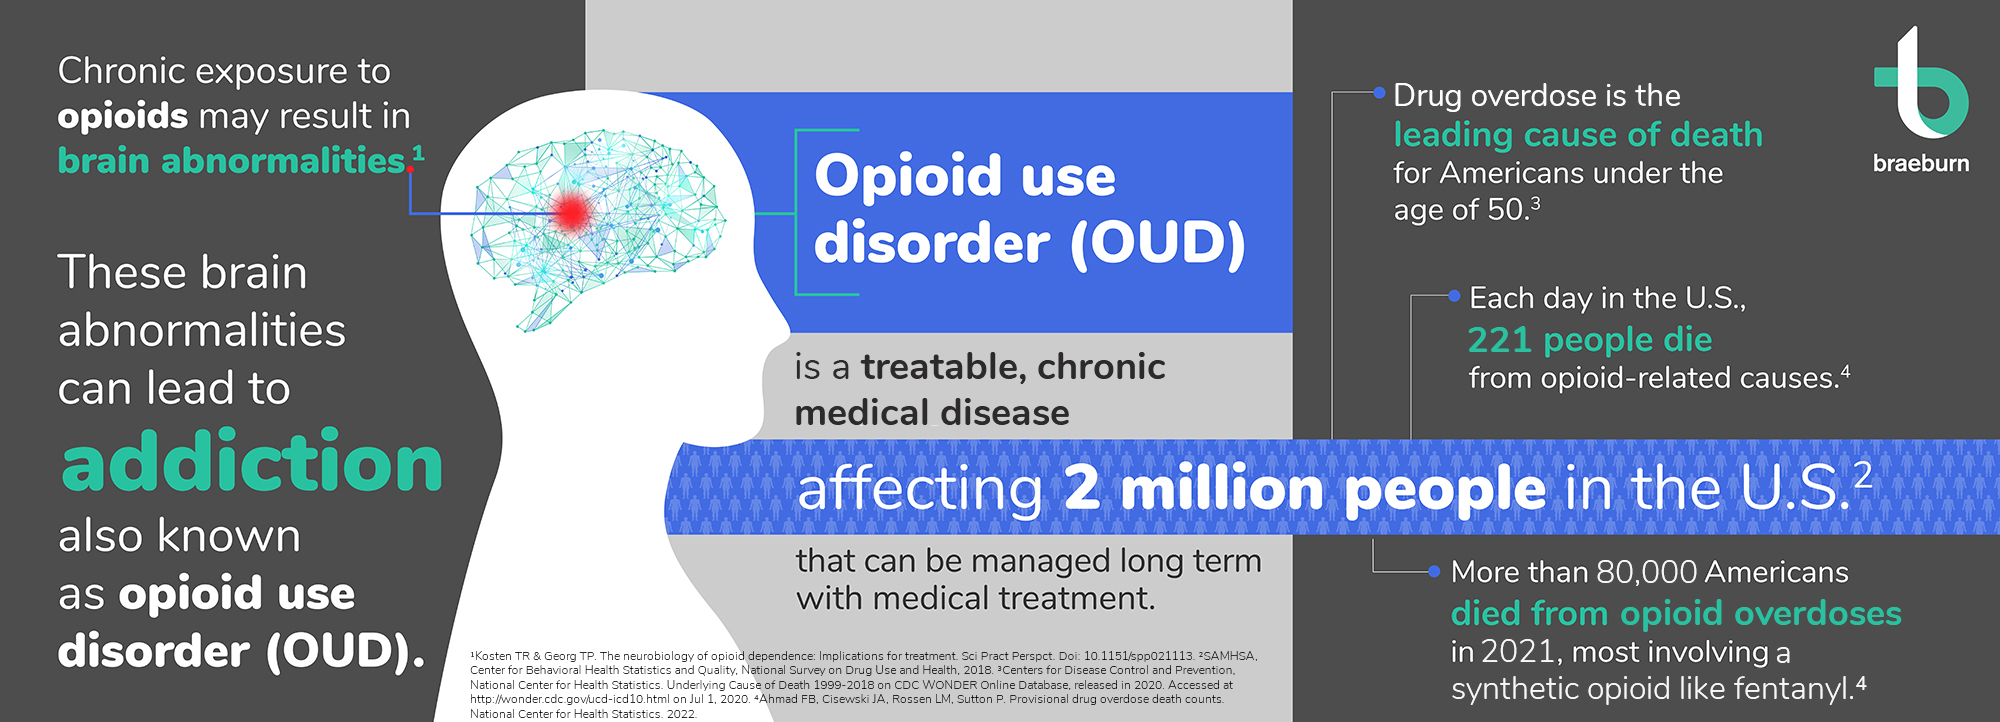 Opioid overdose and misuse are a significant public health crisis in the U.S. today. Chronic exposure to opioids may result in brain abnormalities. These brain abnormalities can lead to the development of addiction known as opioid used disorder. Opioid use disorder (OUD) is a treatable, chronic brain disease affecting 2 million people in the U.S. that can be managed long term with medical treatment. Drug overdose is the leading cause of death for Americans under the age of 50. Each day in the U.S., 221 people die from opioid-related overdoses. More than 80,000 Americans died from opioid overdoses in 2021, most involving an illicit opioid like fentanyl